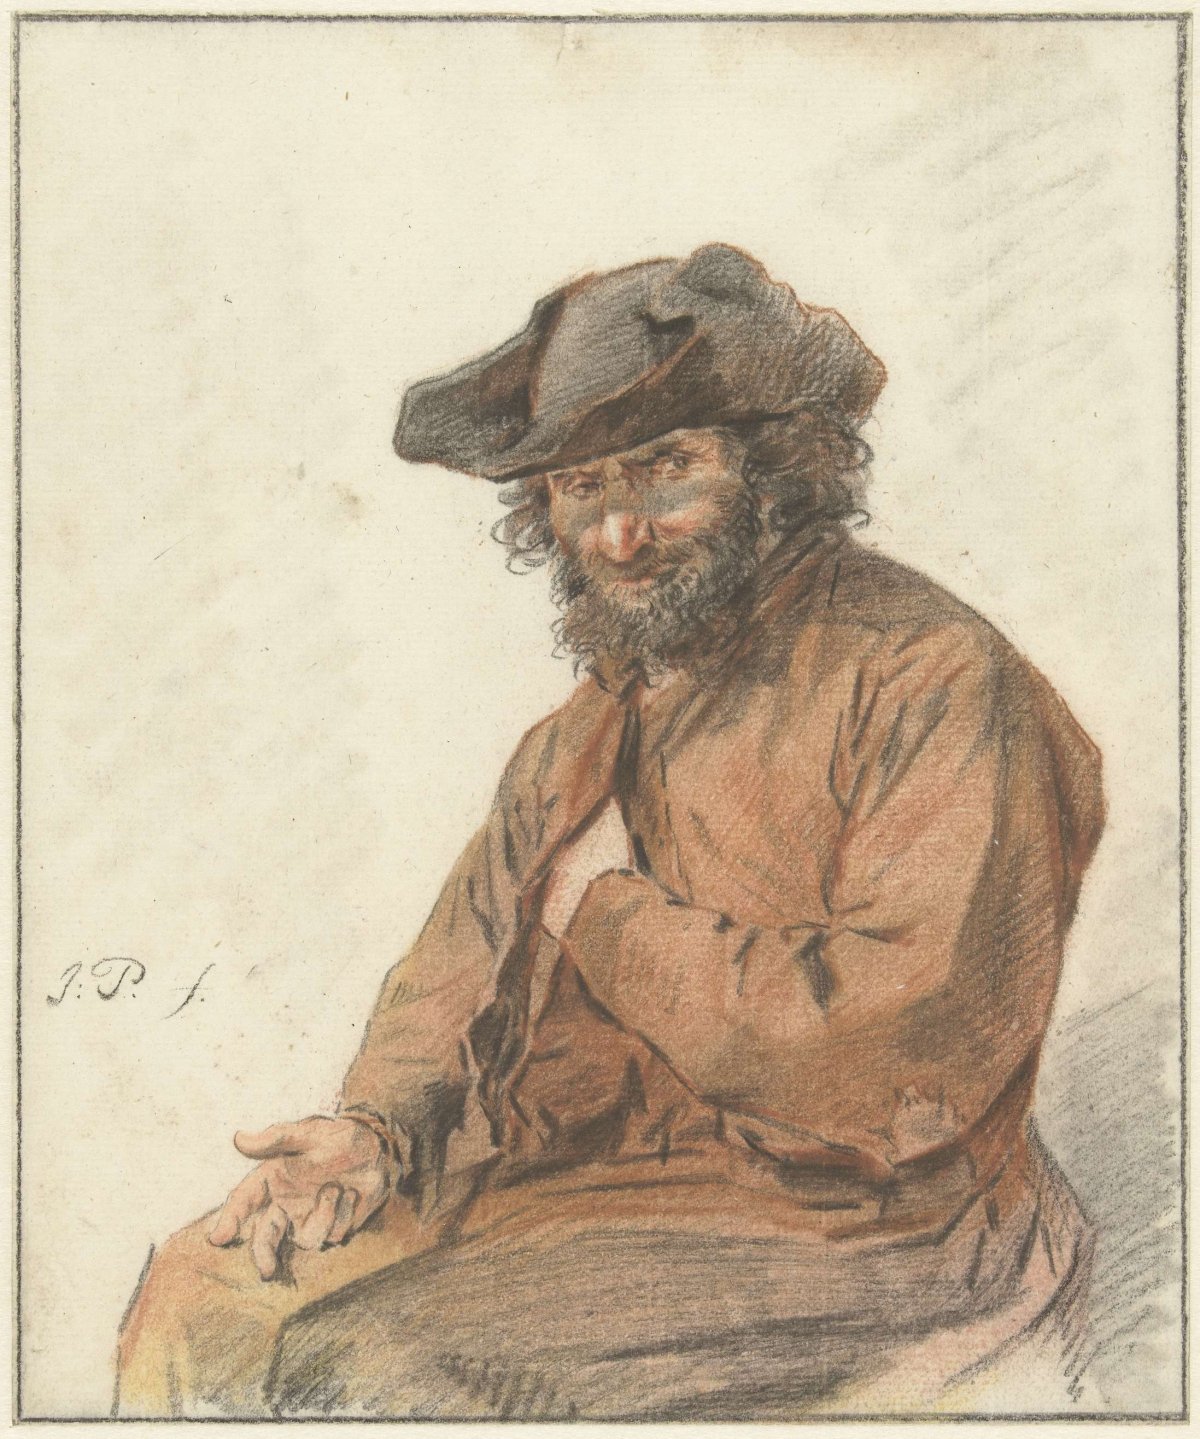 Seated man with long curly hair and black hat, Jacob Perkois, 1790